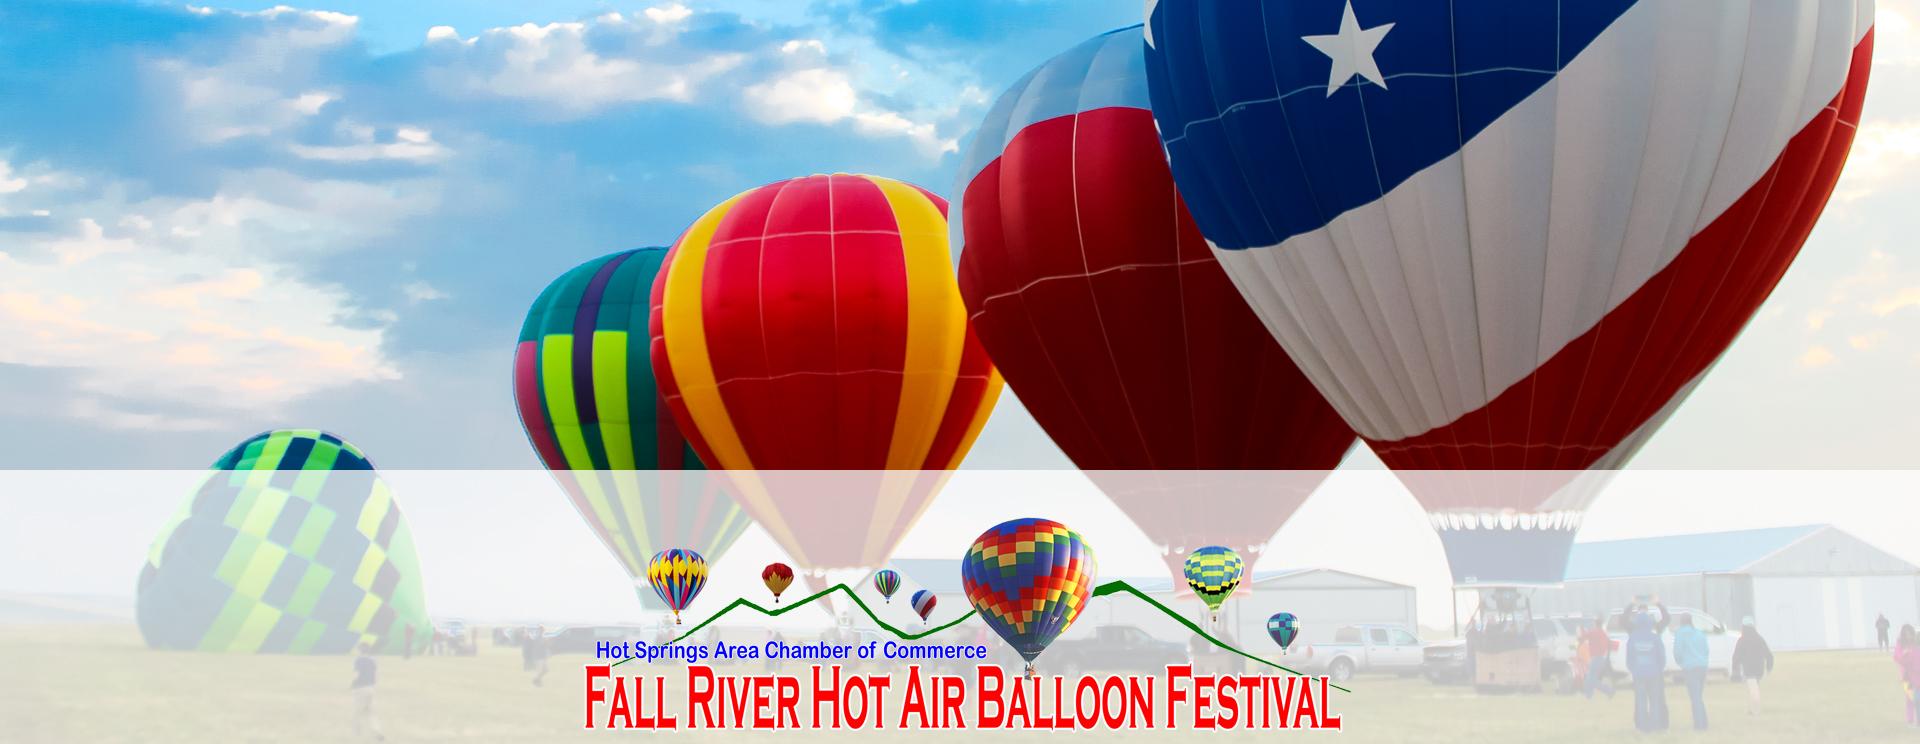 Hot Springs Area Chamber of Commerce Fall River Hot Air Balloon Festival